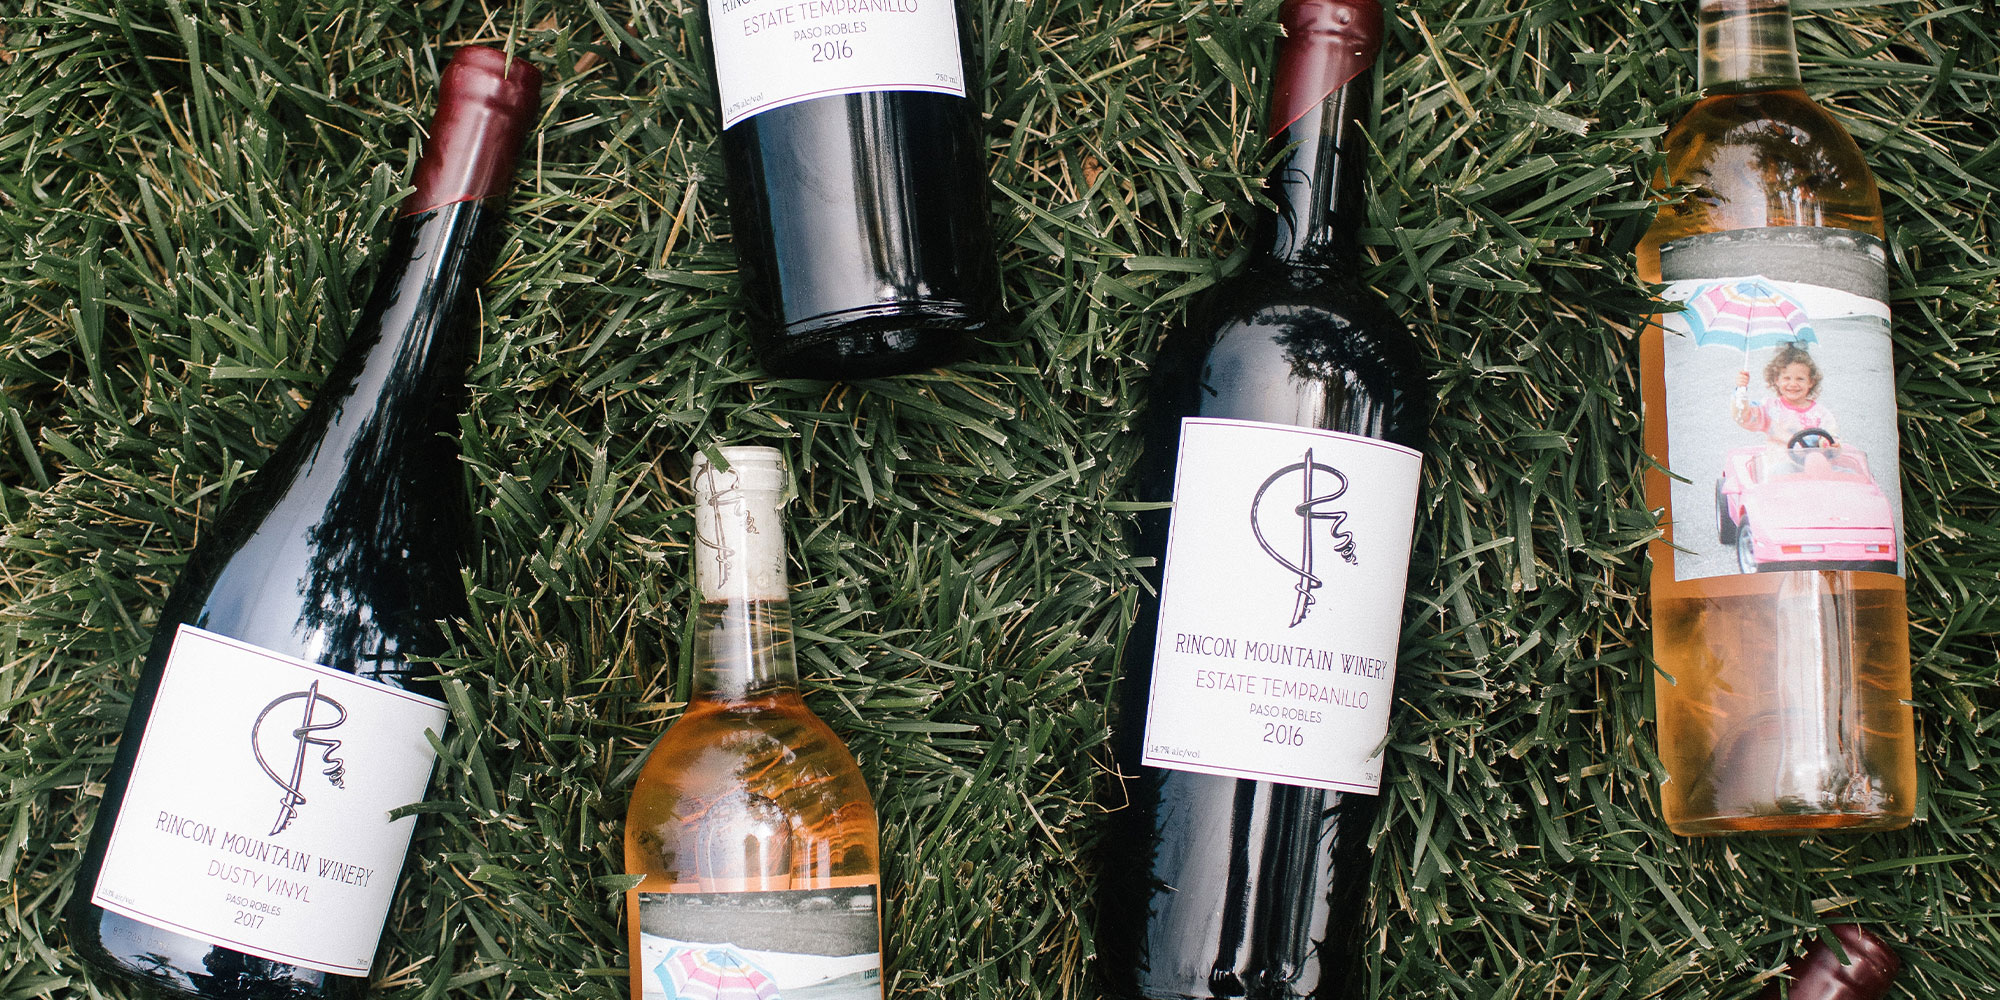 Bottles of Rincon Mountain wines in grass